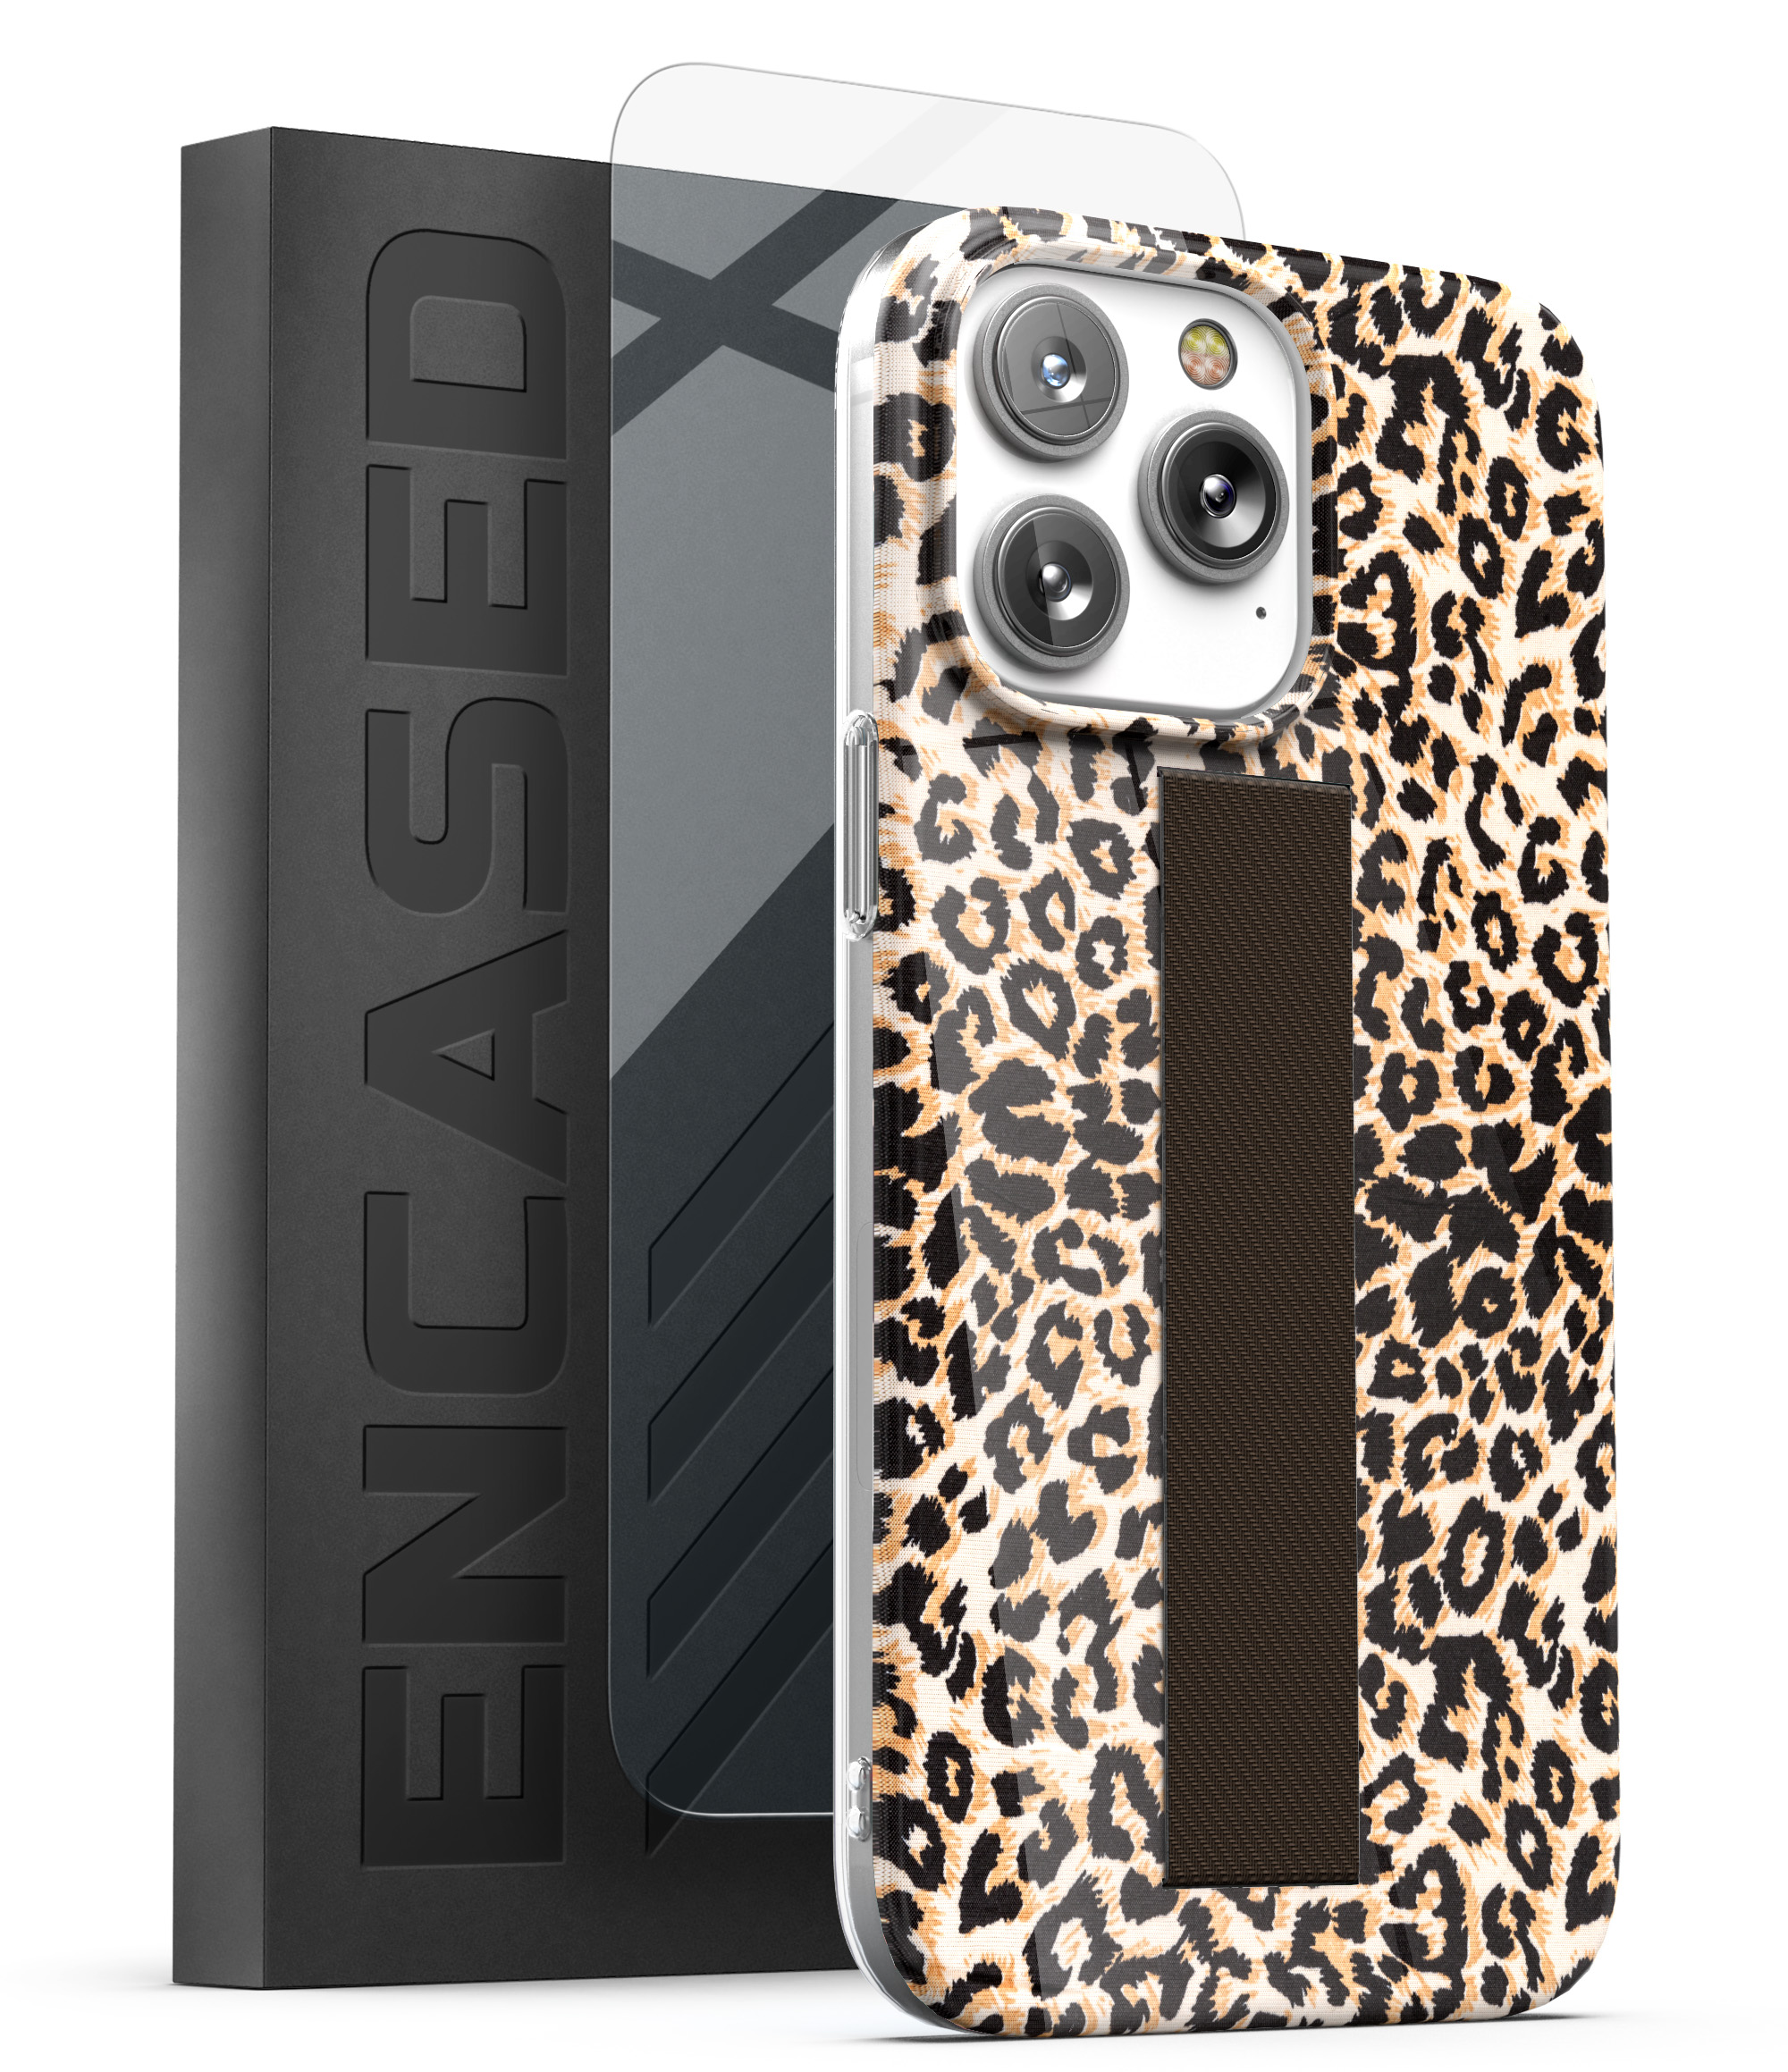 iPhone Pro Max Loop Case in Leopard with Screen Protector - Encased